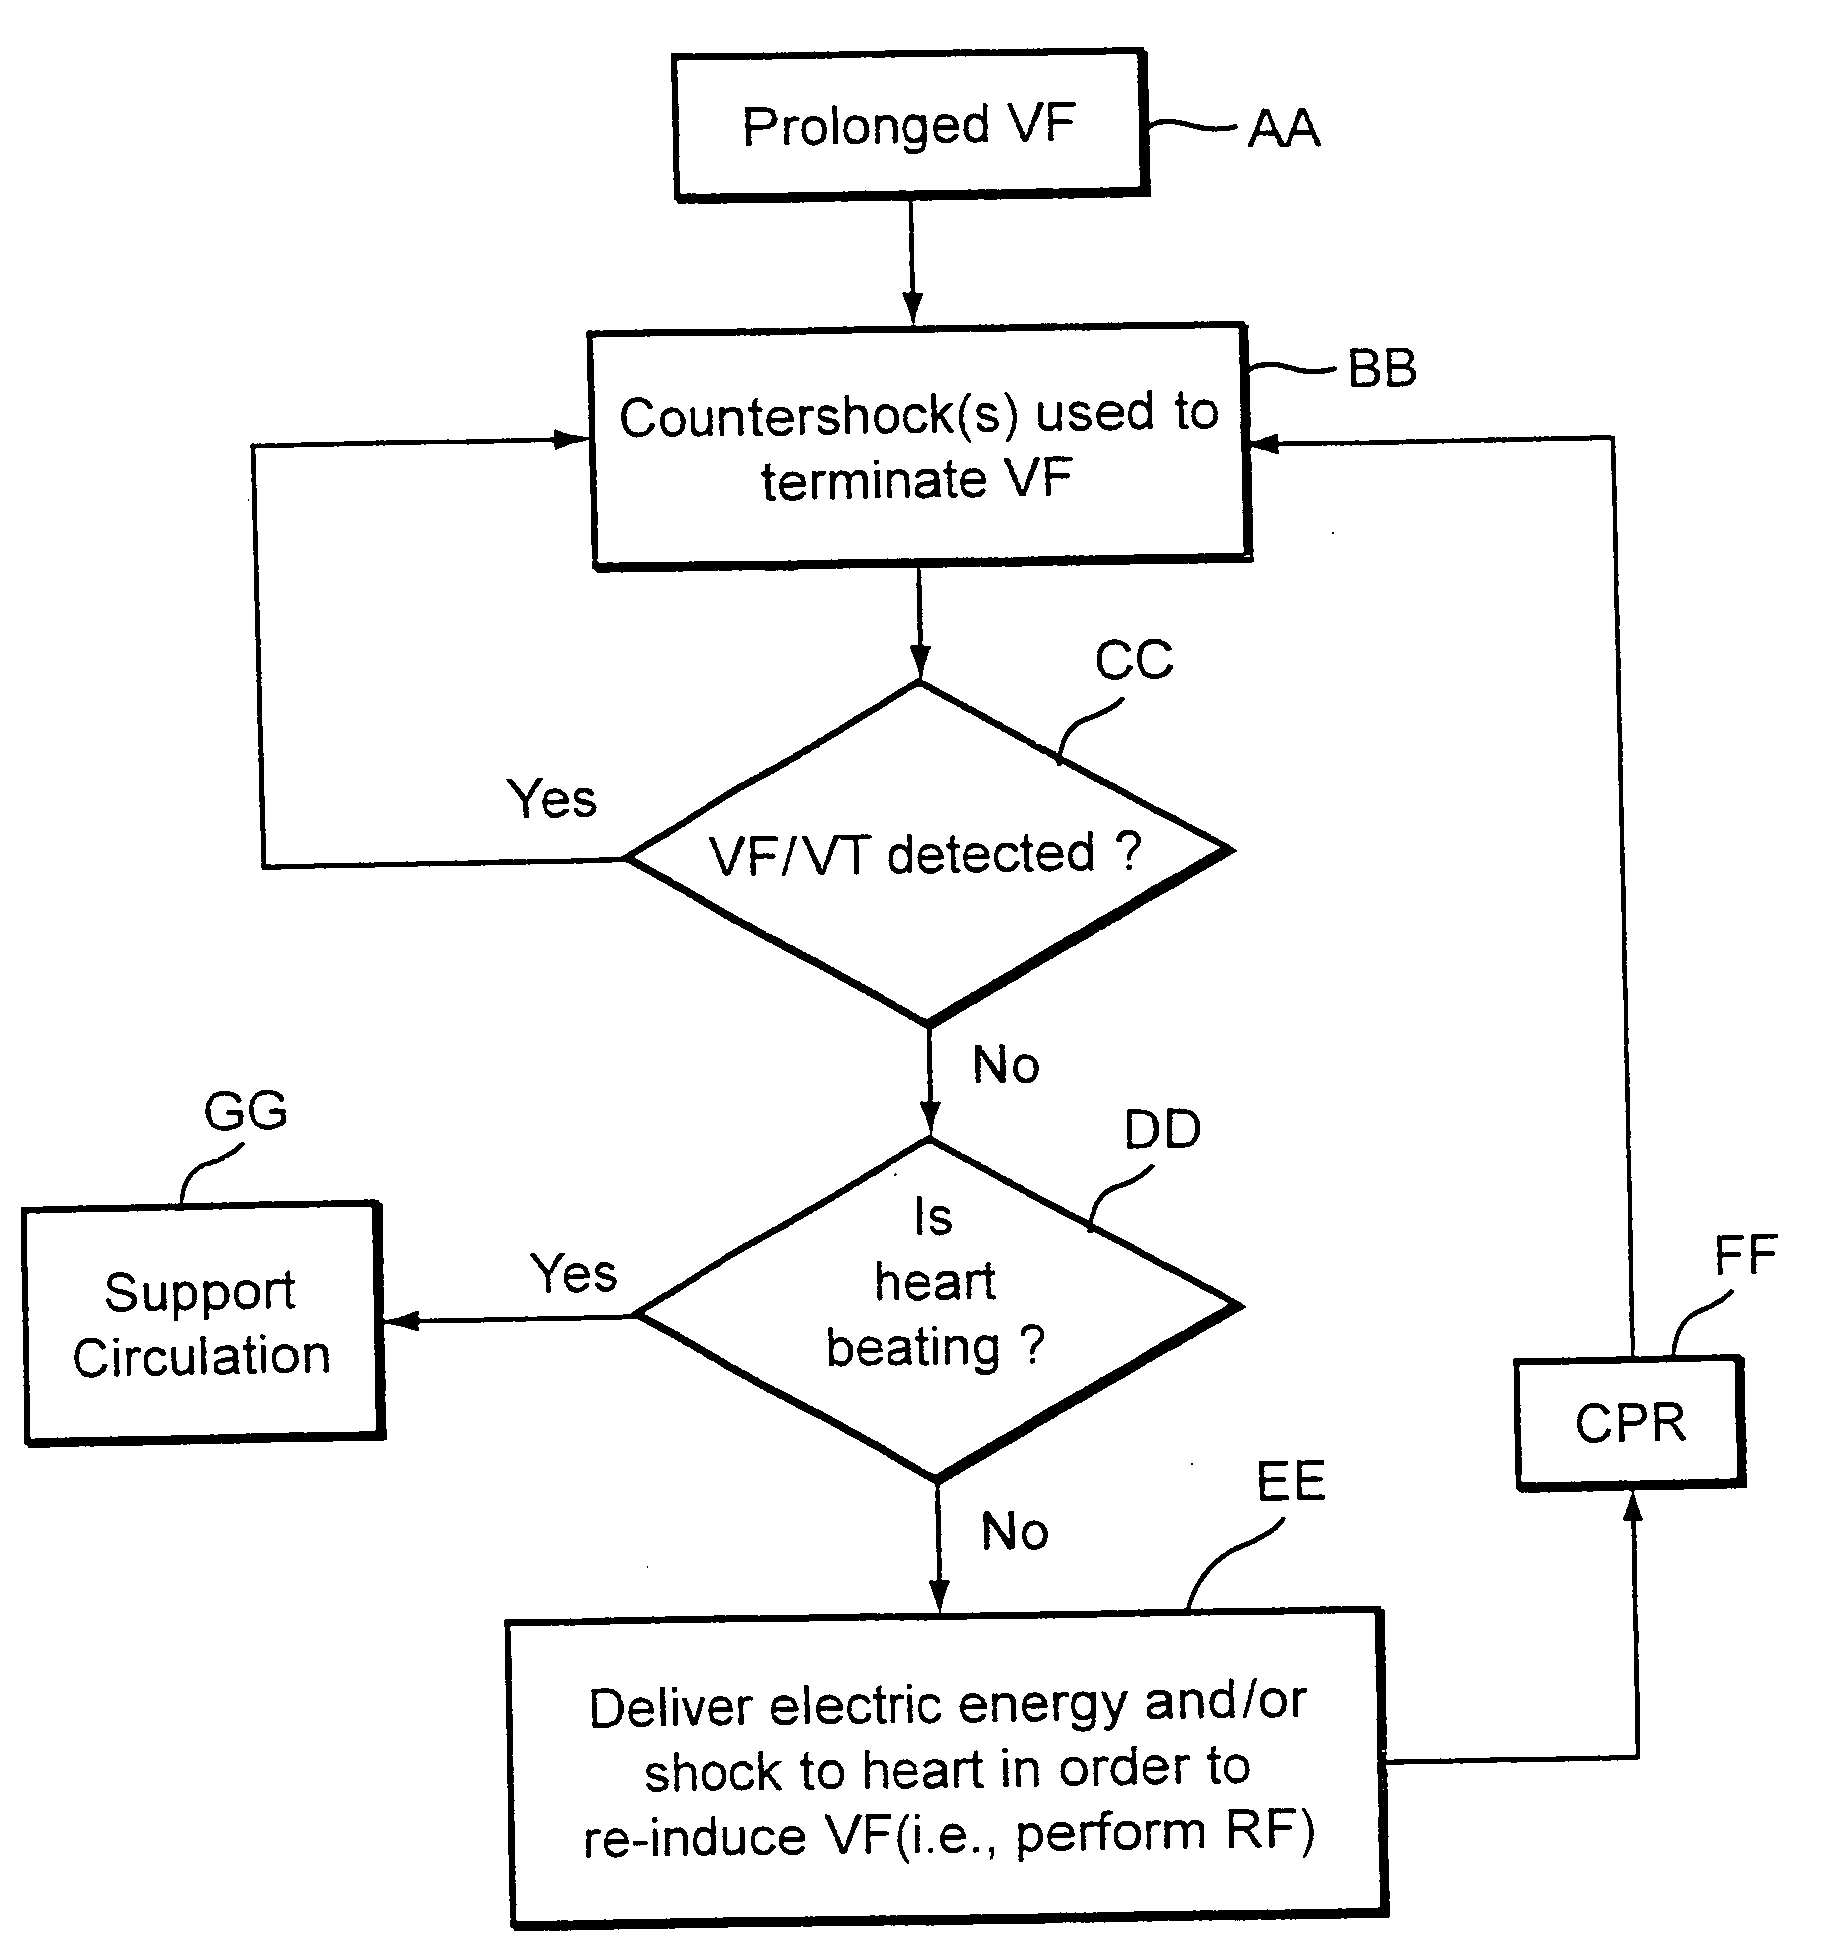 System and/or method for refibrillation of the heart for treatment of post-countershock pulseless electrical activity and/or asystole